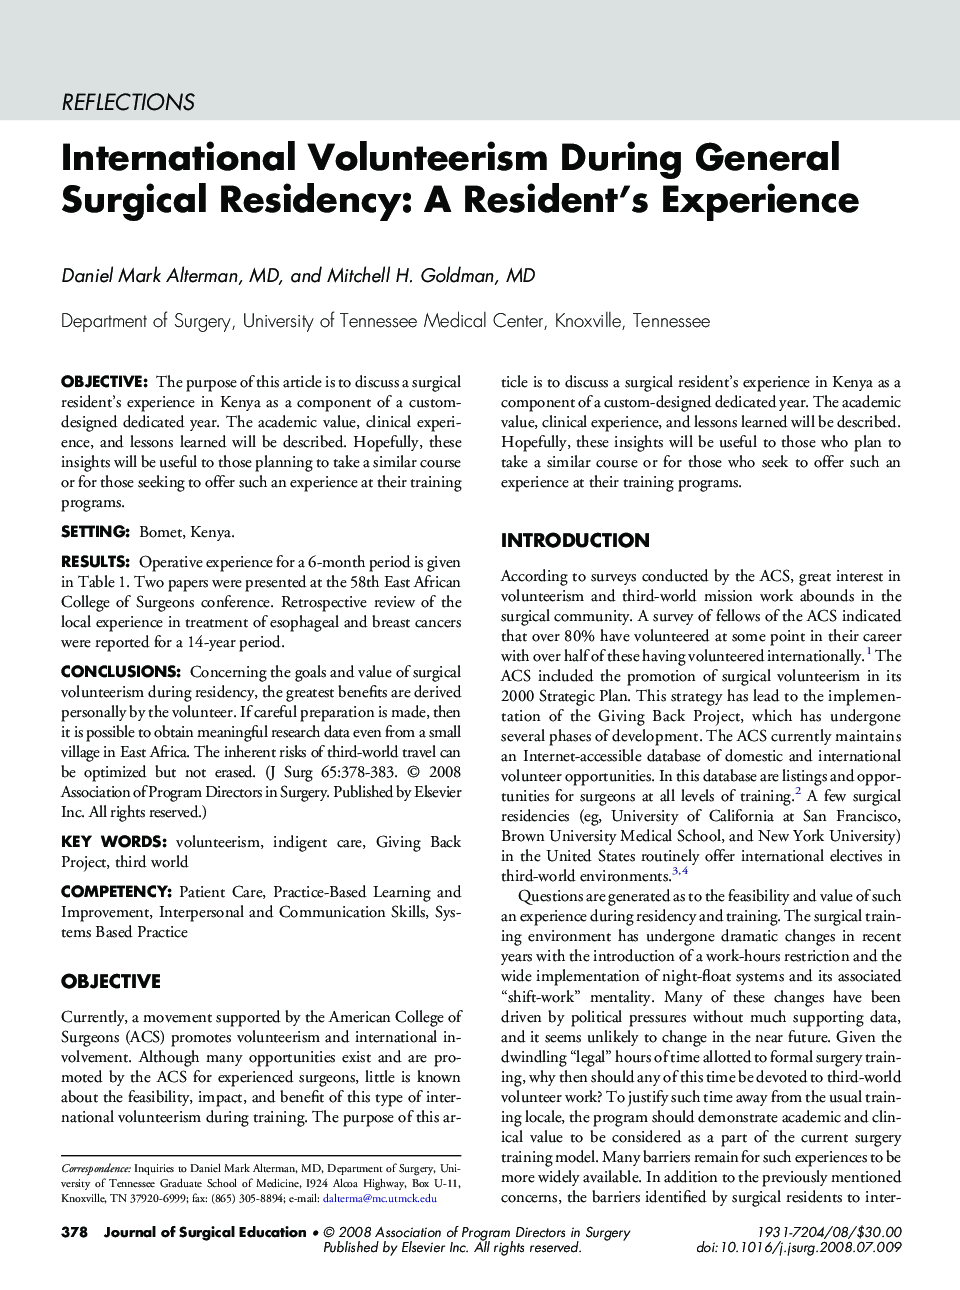 International Volunteerism During General Surgical Residency: A Resident's Experience